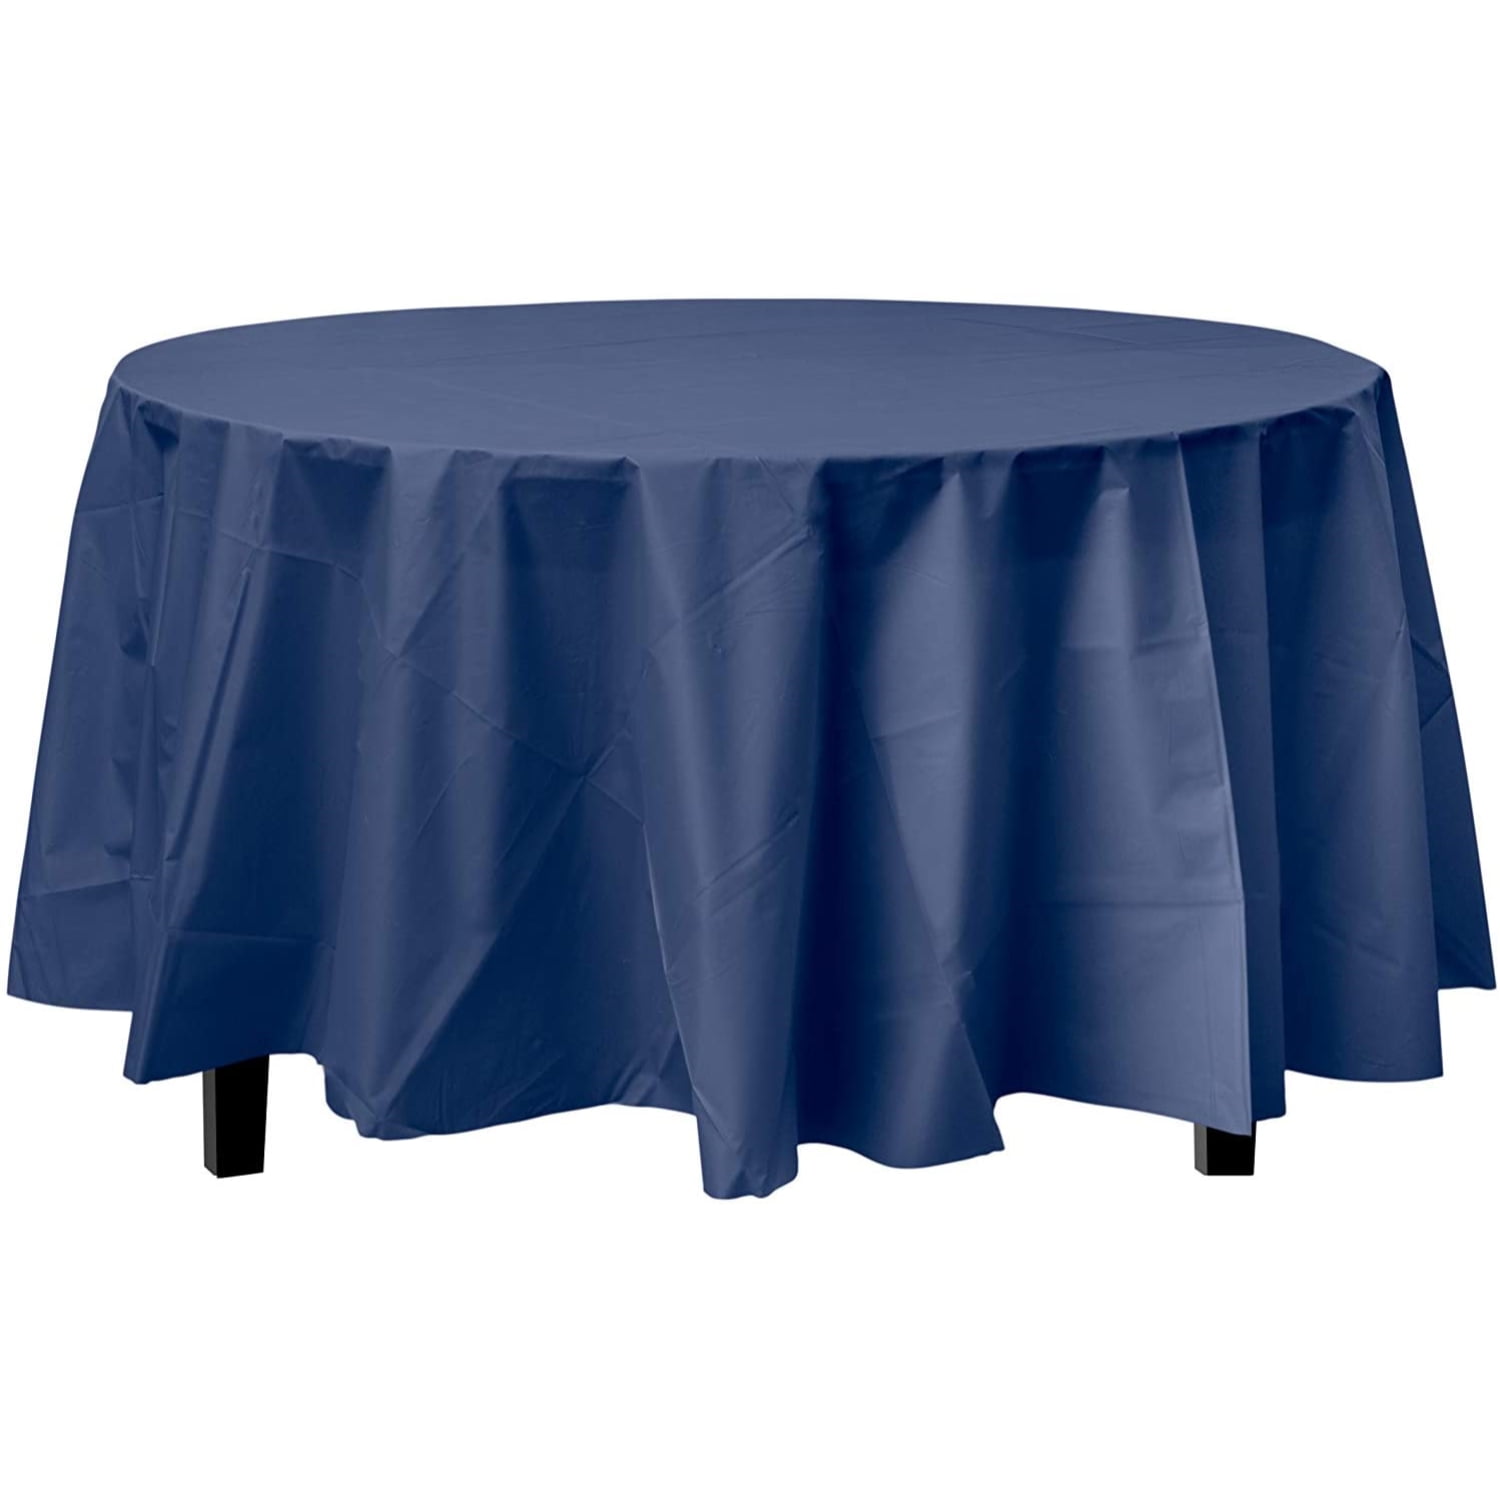 Navy Blue Round Table Covers, Round Table Cloths Bulk